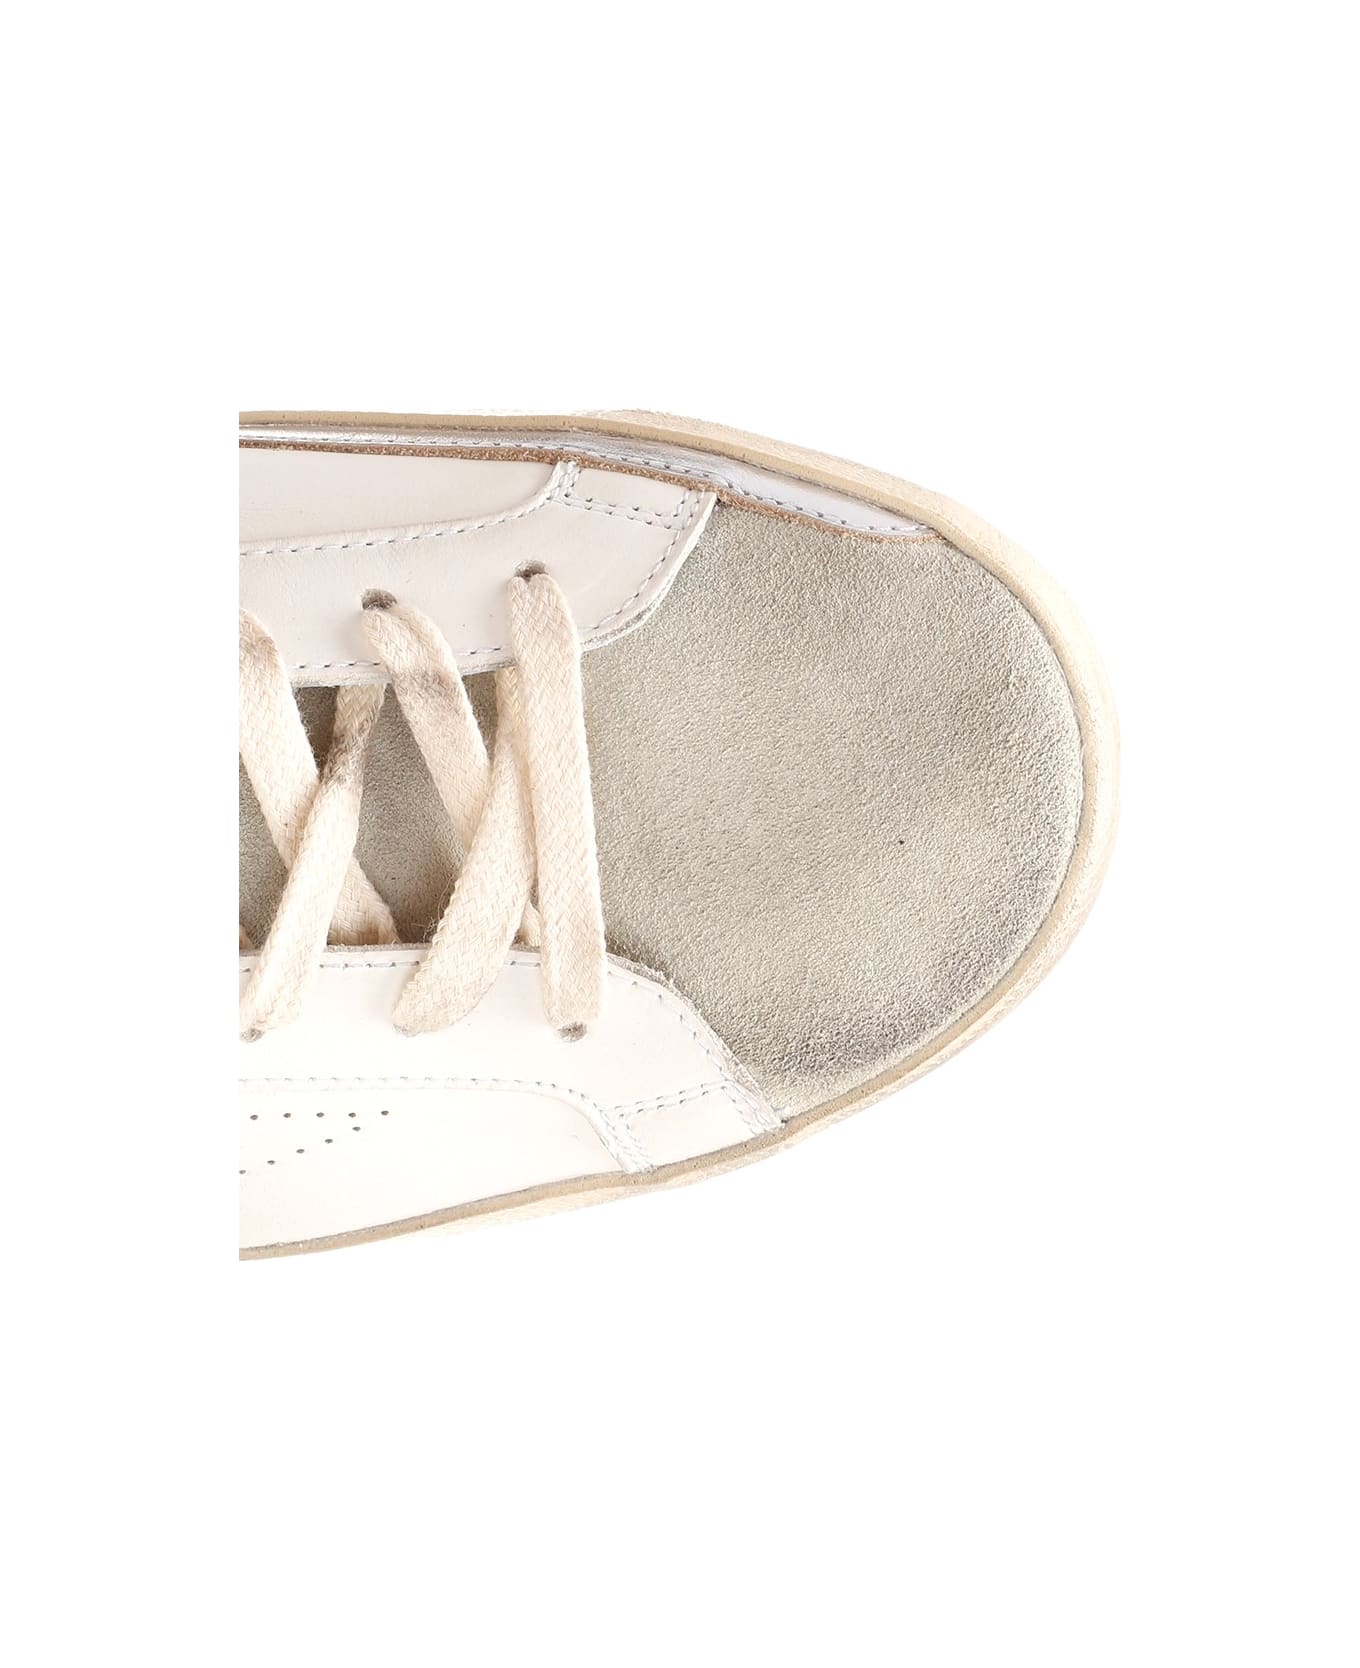 Golden Goose Super-star Leather Low-top Sneakers - White/Ice/Black スニーカー